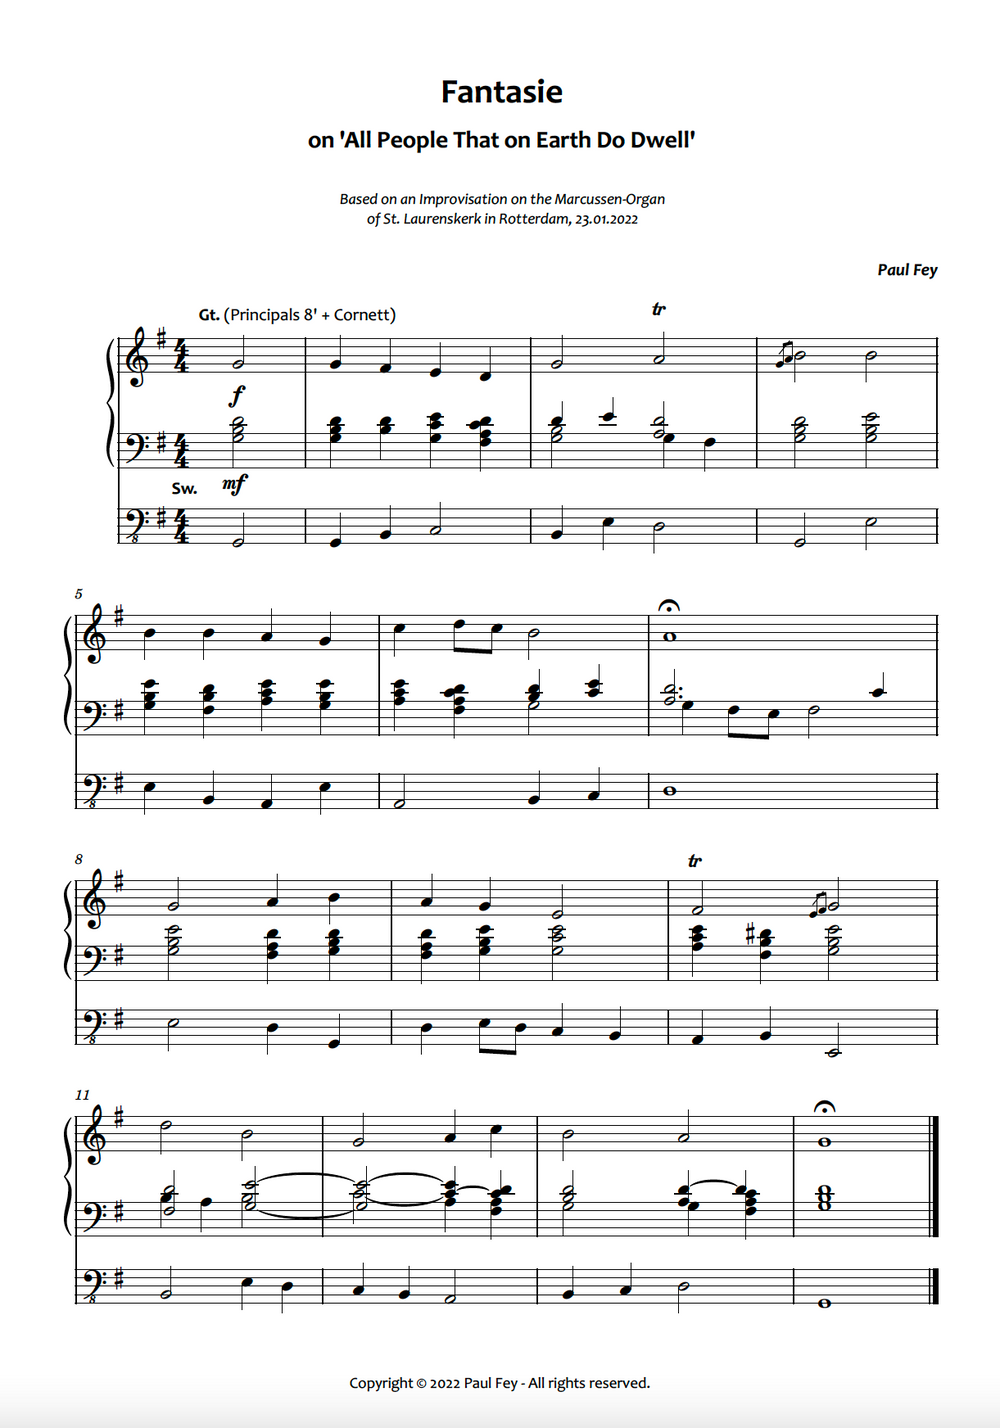 Fantasie on "All People that on Earth Do Dwell" (Sheet Music) - Music for Organ